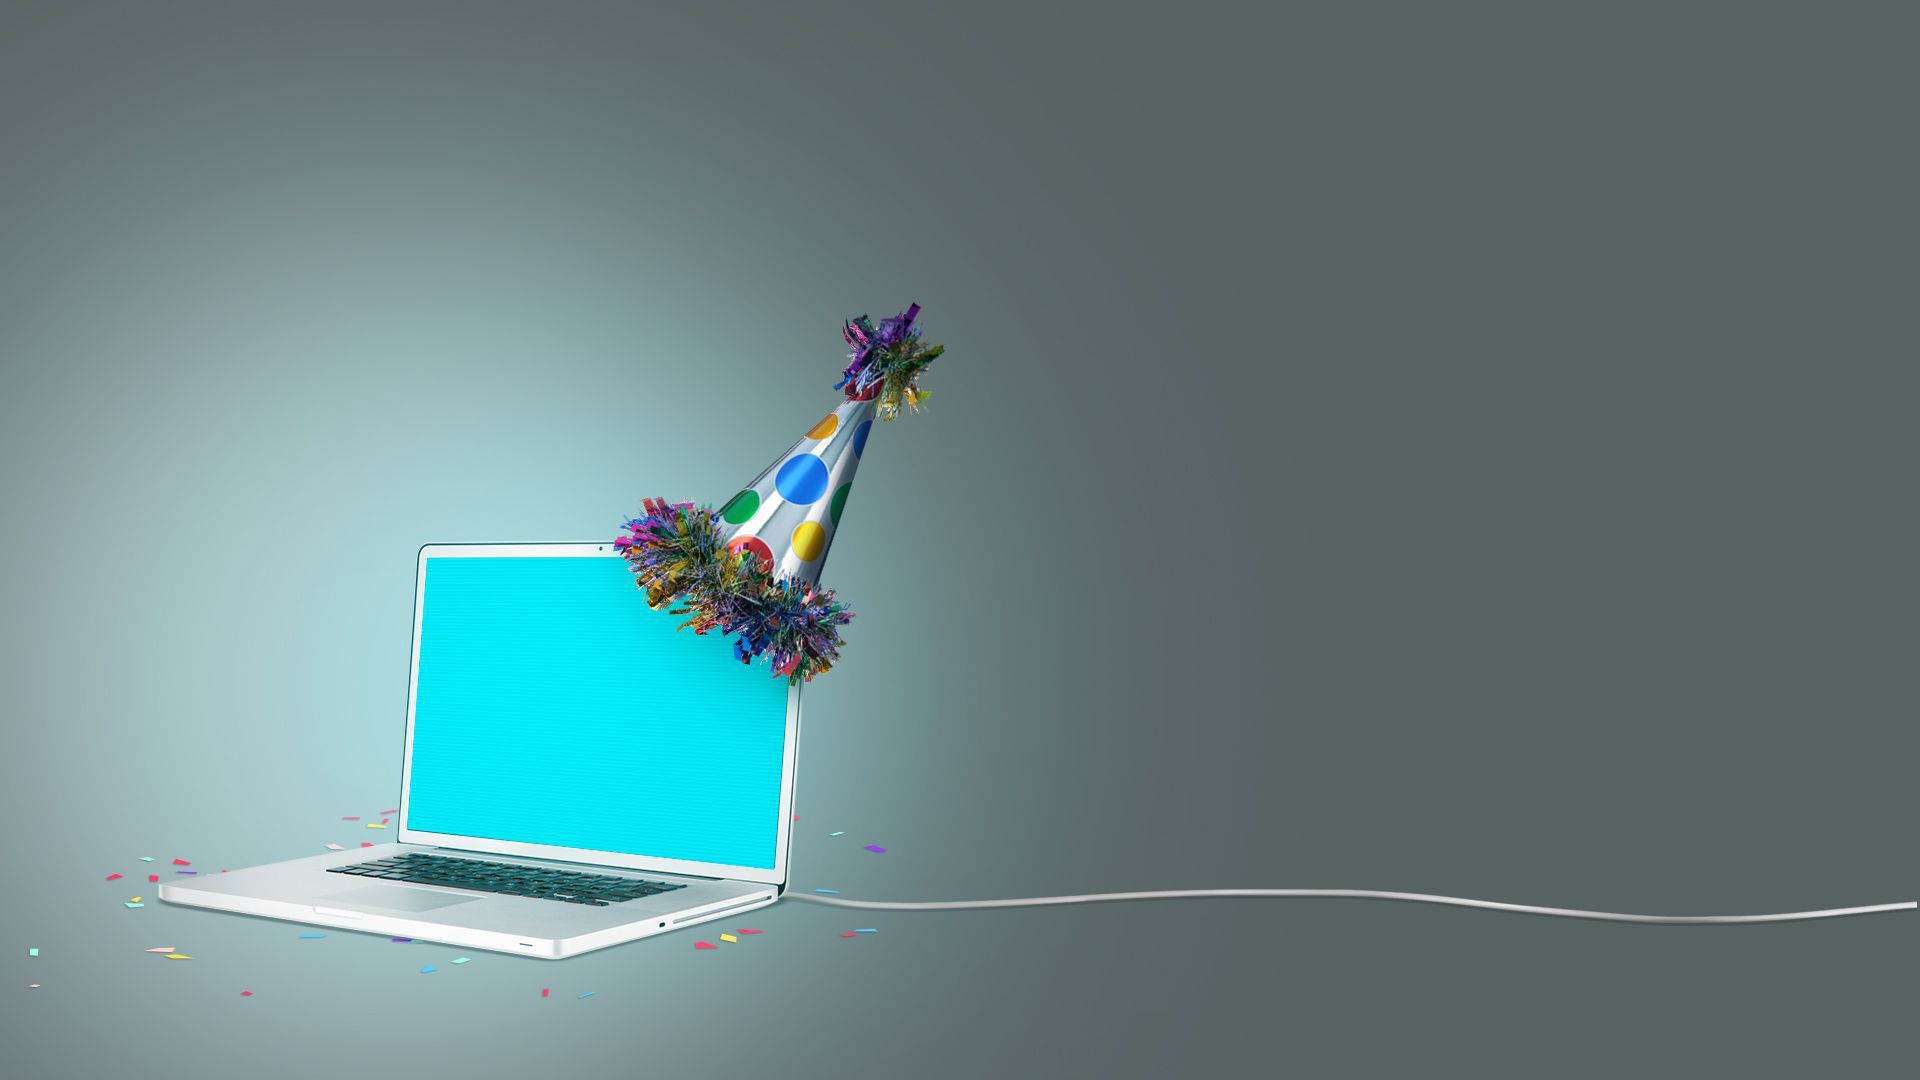 Illustration of a laptop wearing a party hat